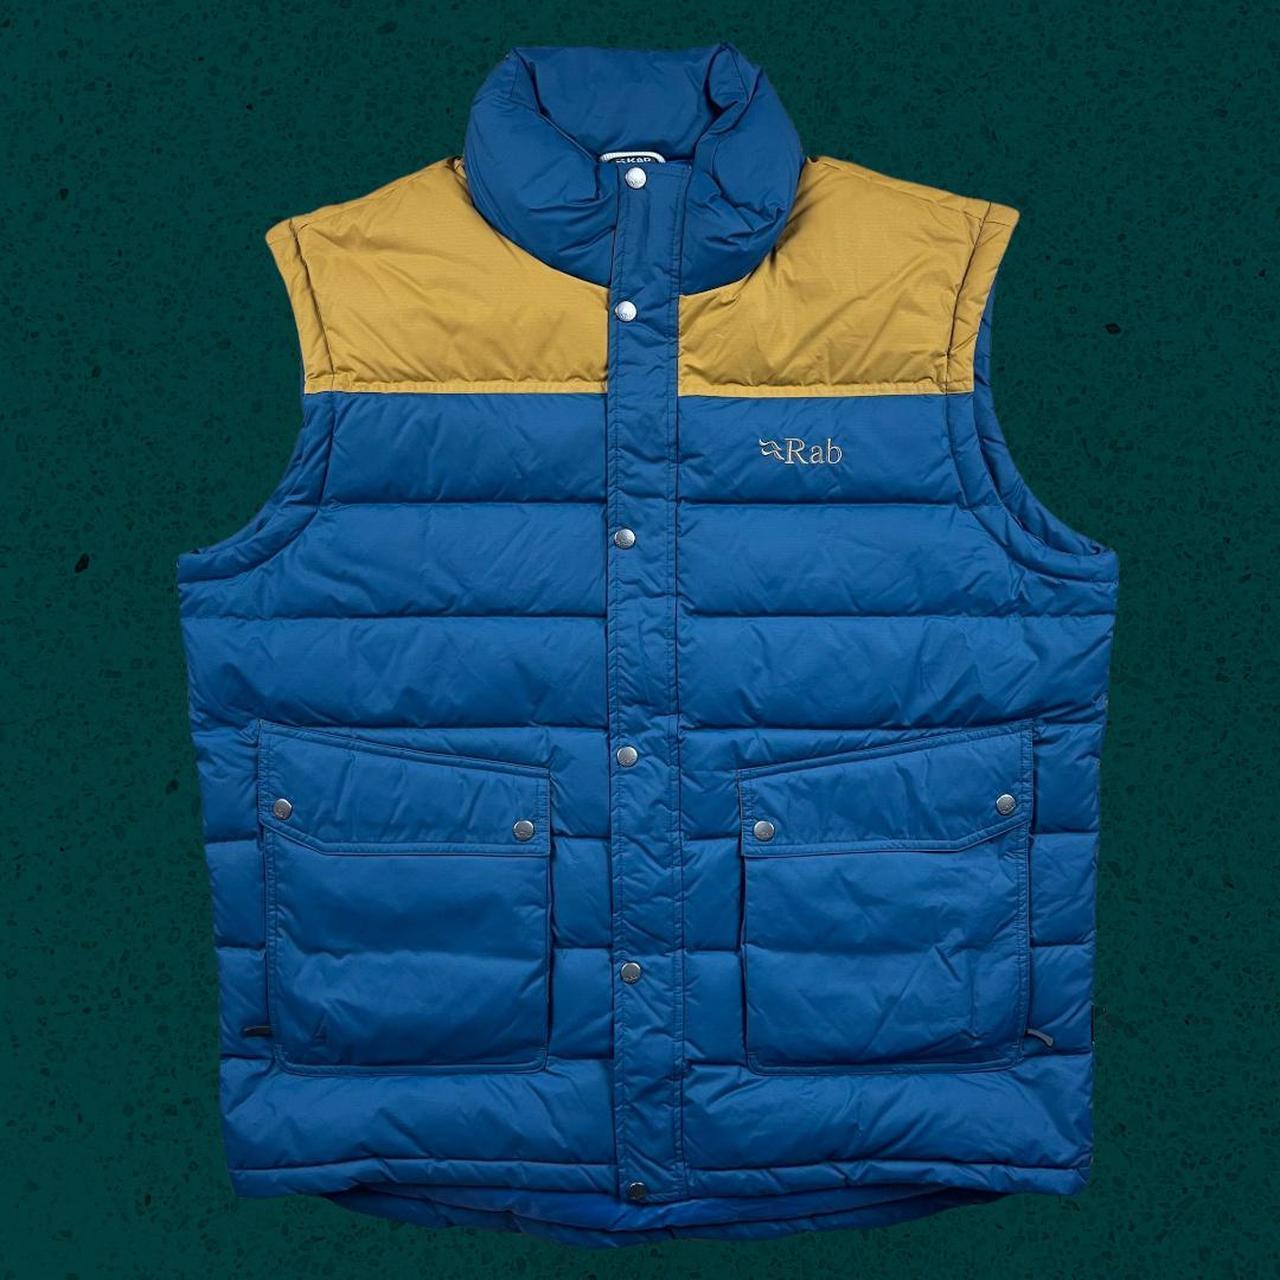 Rab puff insulated gorp vest RAB insulated sanctuary... - Depop